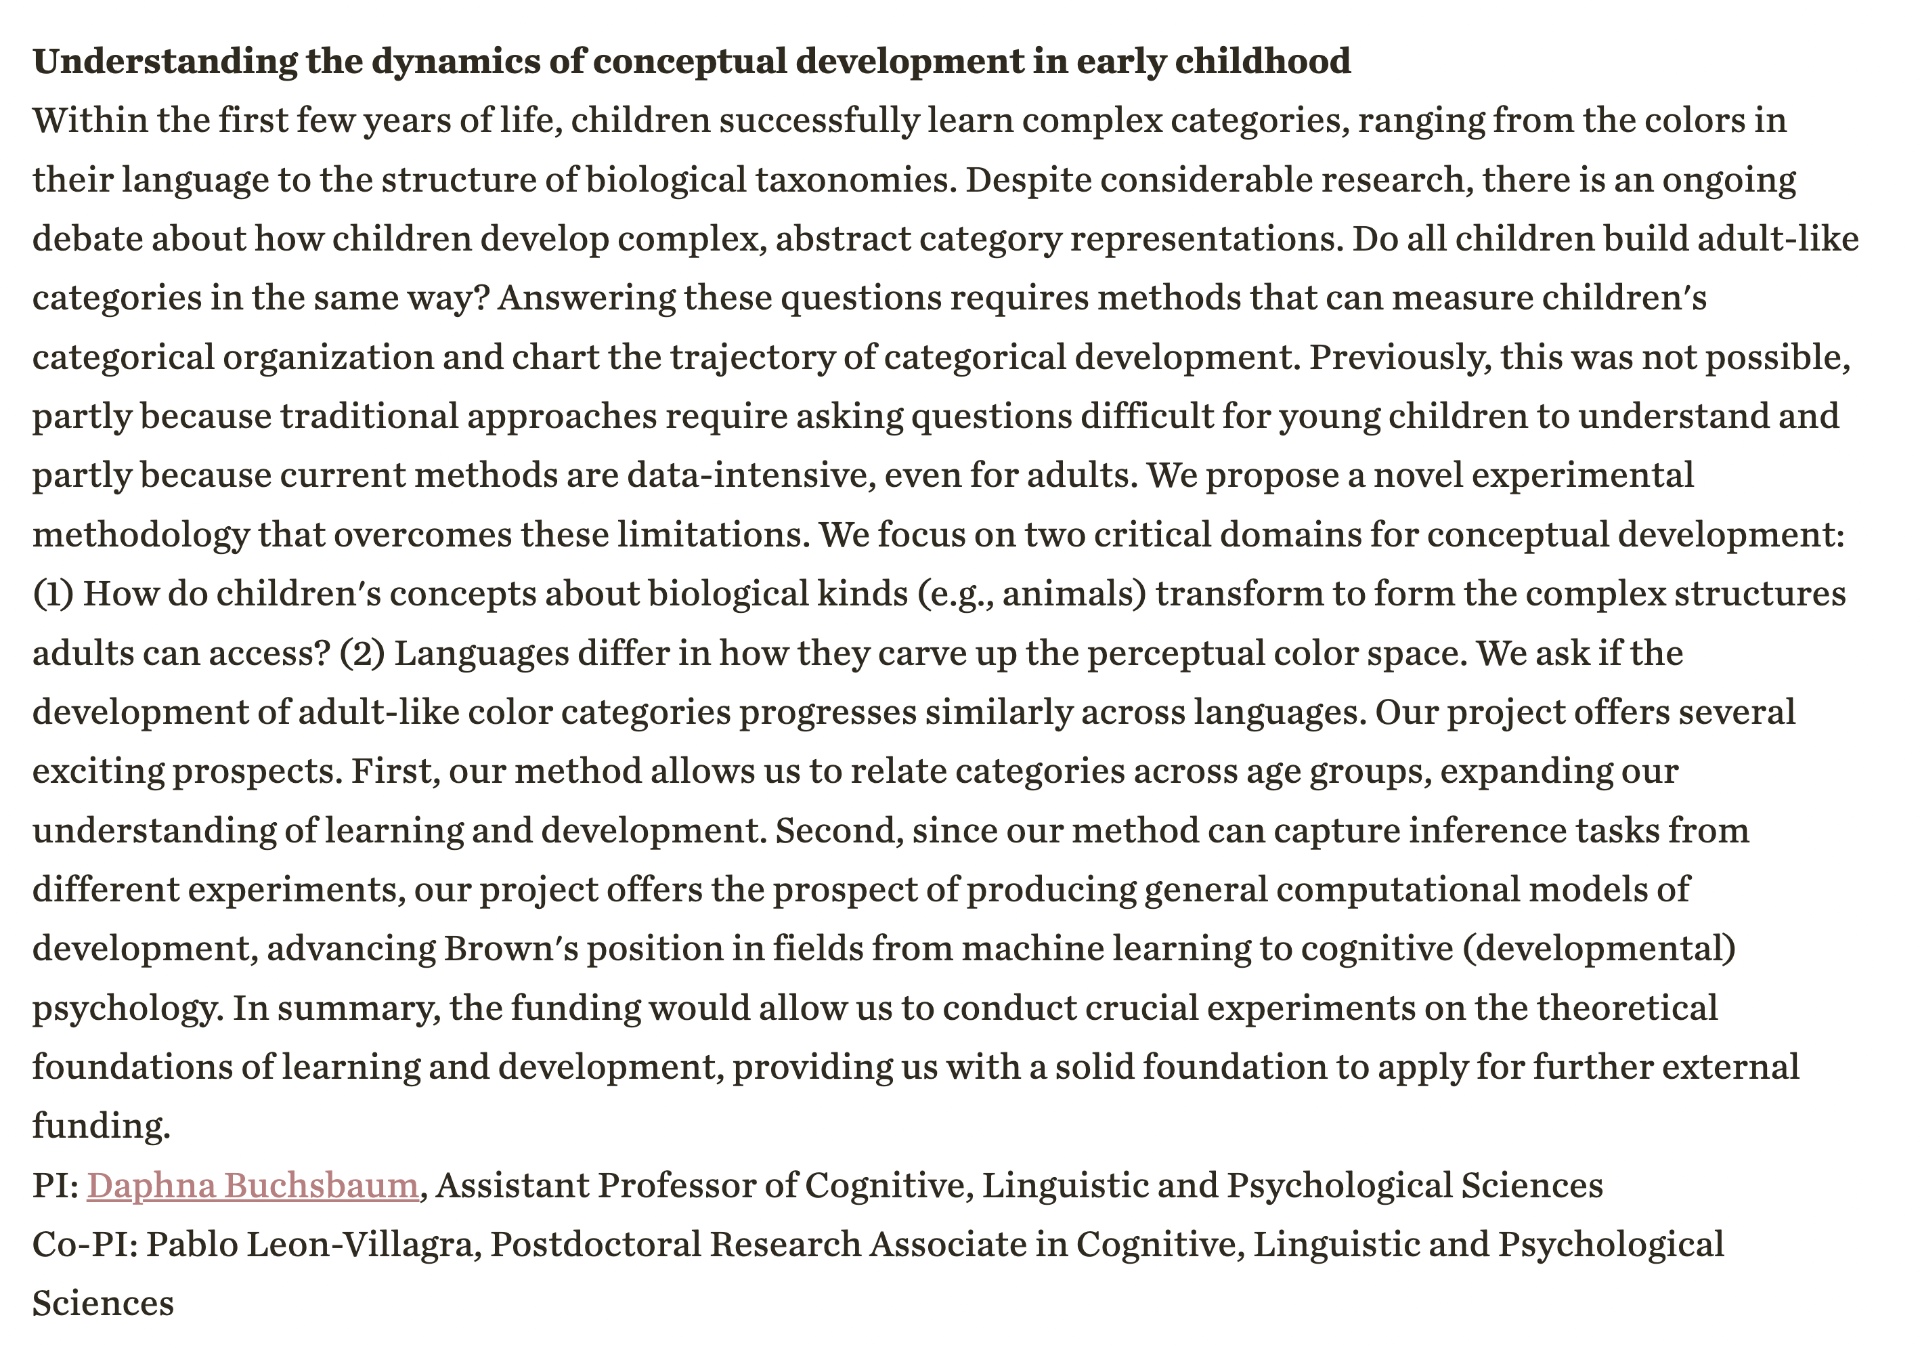 Understanding the dynamics of conceptual development in early childhood<br />
Within the first few years of life, children successfully learn complex categories, ranging from the colors in their language to the structure of biological taxonomies. Despite considerable research, there is an ongoing debate about how children develop complex, abstract category representations. Do all children build adult-like categories in the same way? Answering these questions requires methods that can measure children's categorical organization and chart the trajectory of categorical development. Previously, this was not possible, partly because traditional approaches require asking questions difficult for young children to understand and partly because current methods are data-intensive, even for adults. We propose a novel experimental methodology that overcomes these limitations. We focus on two critical domains for conceptual development: (1) How do children's concepts about biological kinds (e.g., animals) transform to form the complex structures adults can access? (2) Languages differ in how they carve up the perceptual color space. We ask if the development of adult-like color categories progresses similarly across languages. Our project offers several exciting prospects. First, our method allows us to relate categories across age groups, expanding our understanding of learning and development. Second, since our method can capture inference tasks from different experiments, our project offers the prospect of producing general computational models of development, advancing Brown's position in fields from machine learning to cognitive (developmental) psychology. In summary, the funding would allow us to conduct crucial experiments on the theoretical foundations of learning and development, providing us with a solid foundation to apply for further external funding.<br />
PI: Daphna Buchsbaum, Assistant Professor of Cognitive, Linguistic and Psychological Sciences<br />
Co-PI: Pablo Leon-Villagra, Postdoctoral Research Associate in Cognitive, Linguistic and Psychological Sciences